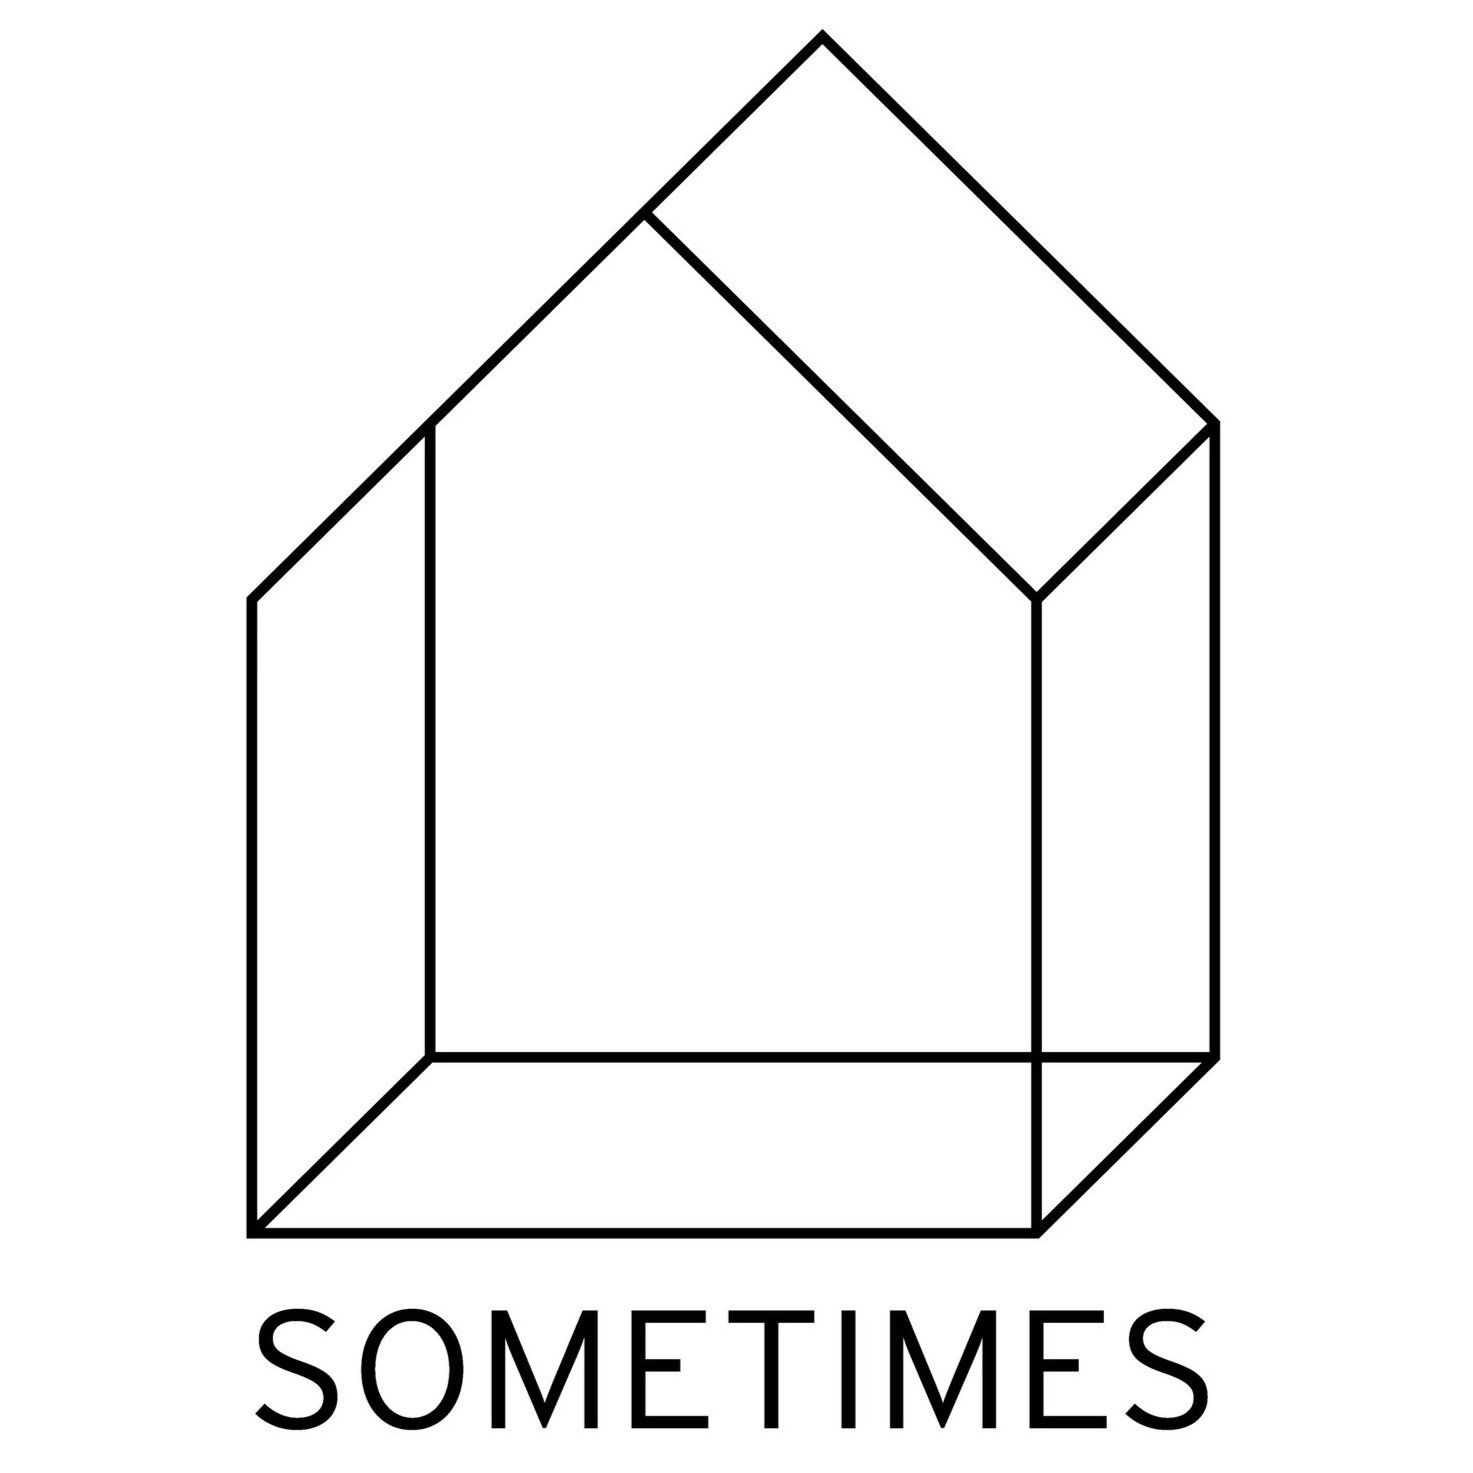 A Sometimes Gallery